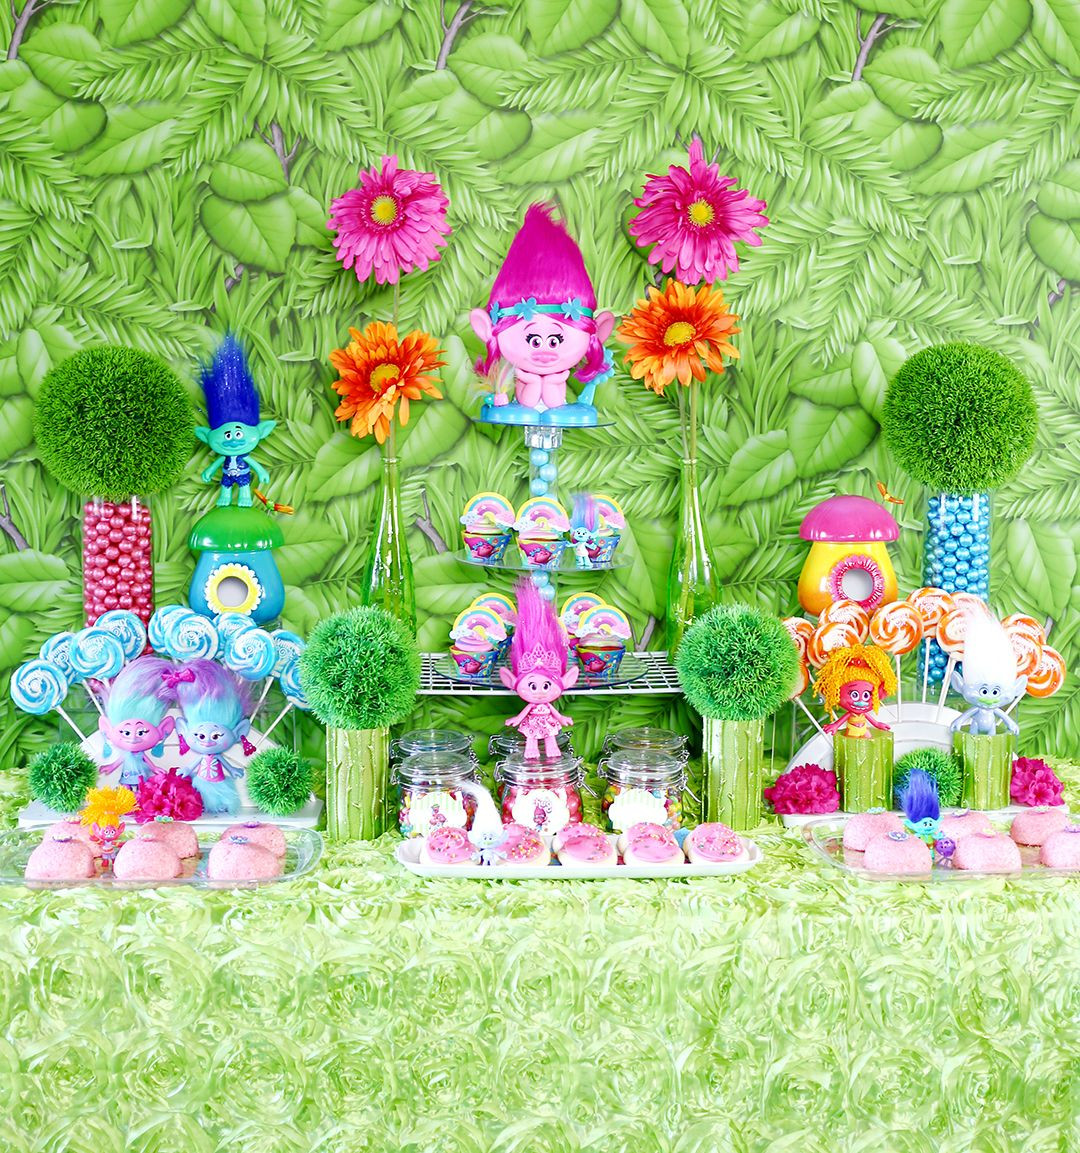 Dreamworks Trolls Party Ideas
 Check out this post full of fun DreamWorks Trolls Party